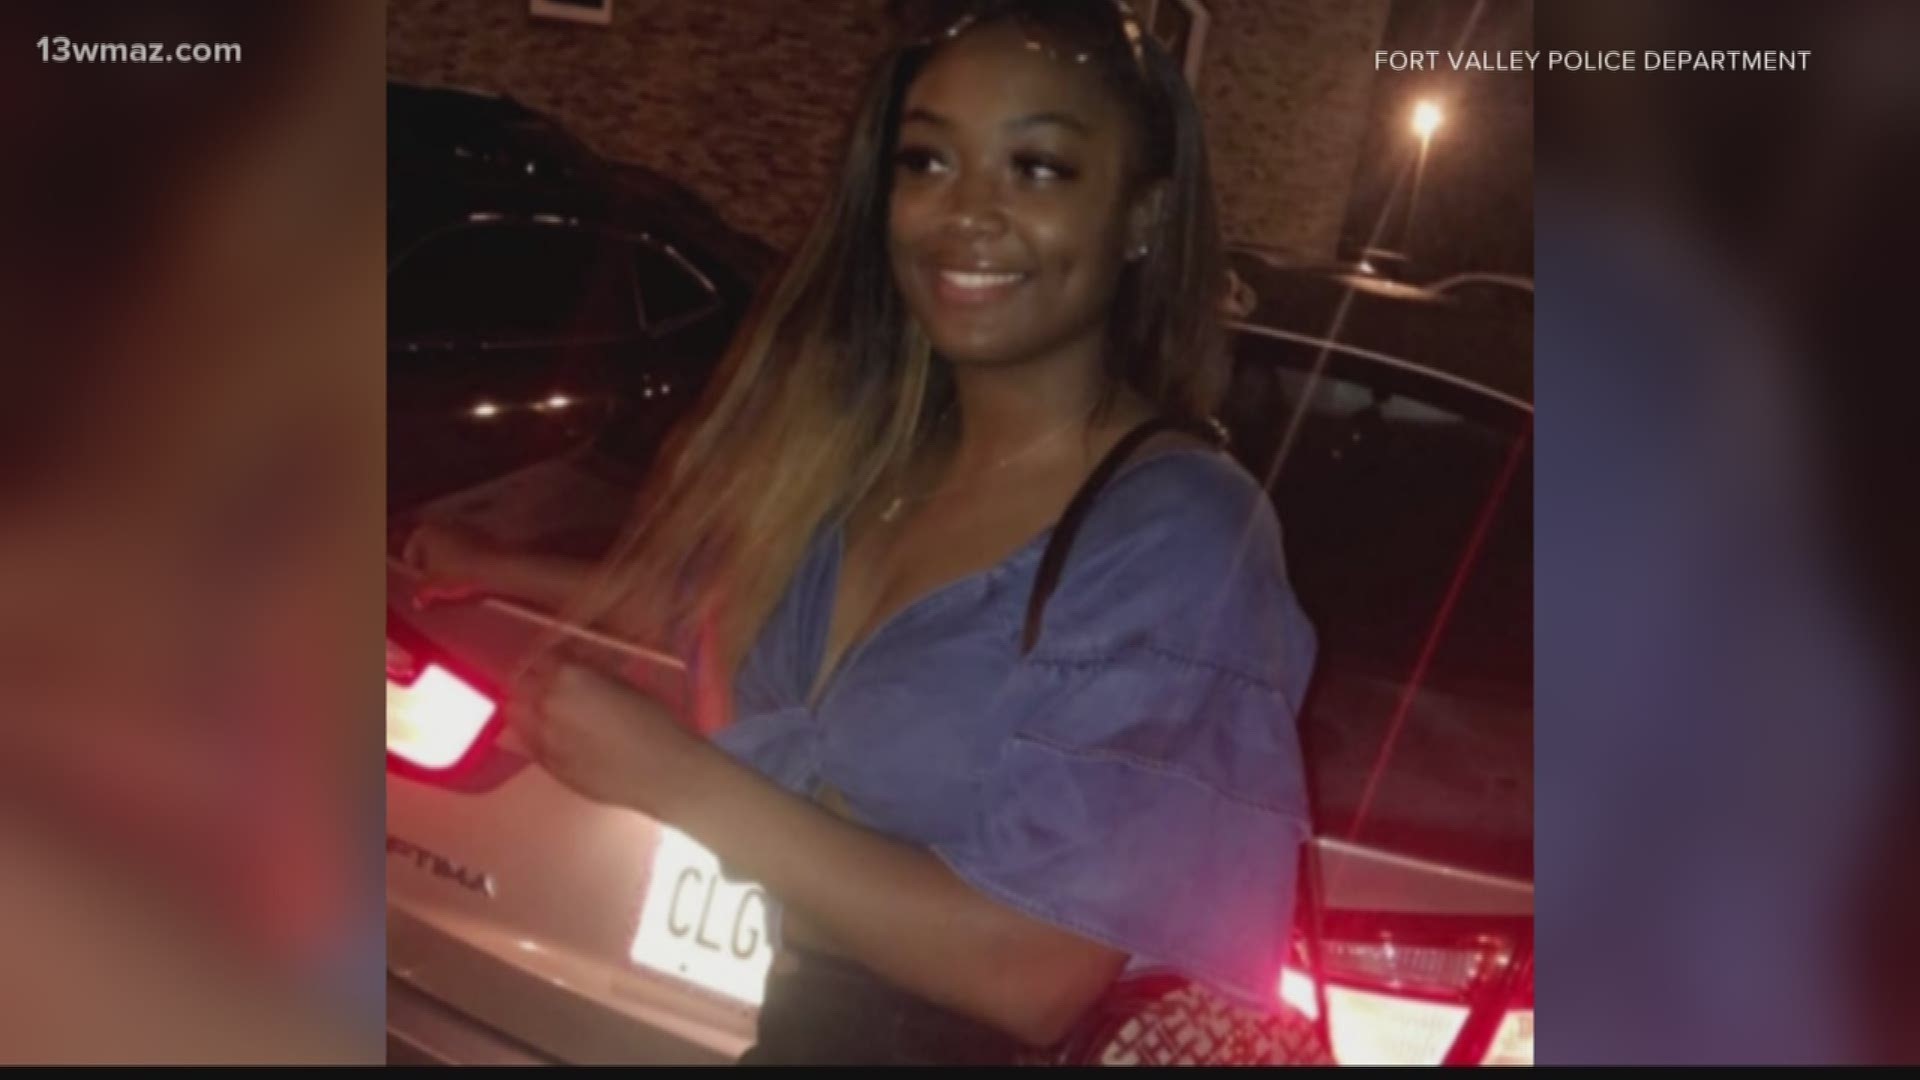 Law enforcement agencies are searching for a missing 23-year-old university student after she was last seen on Valentine's Day.